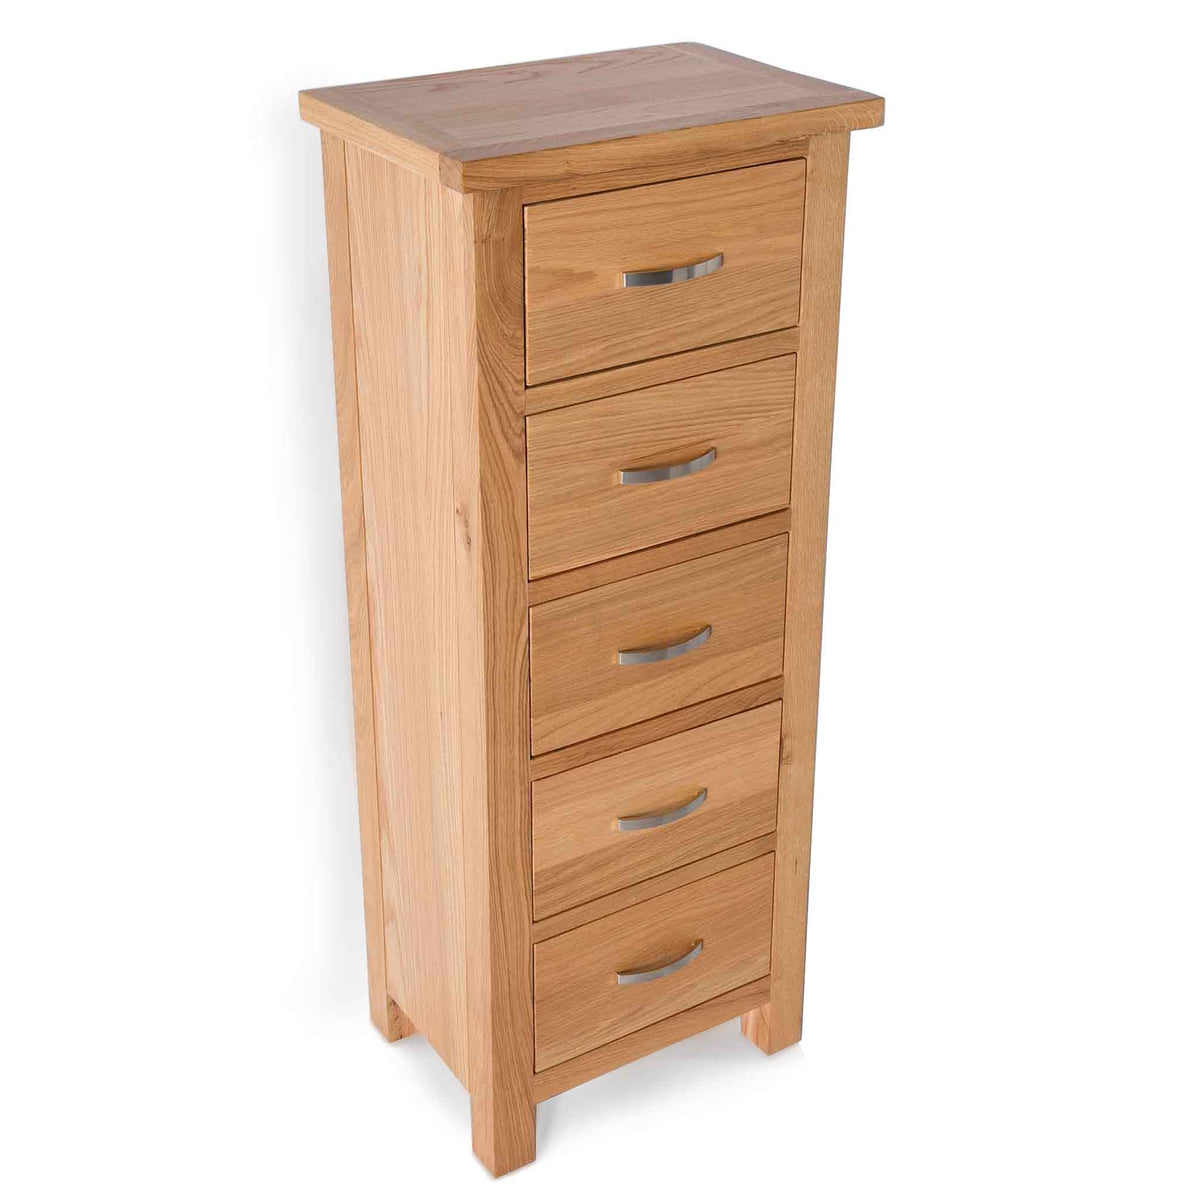 London Oak Tallboy Chest by Roseland Furniture - Top View